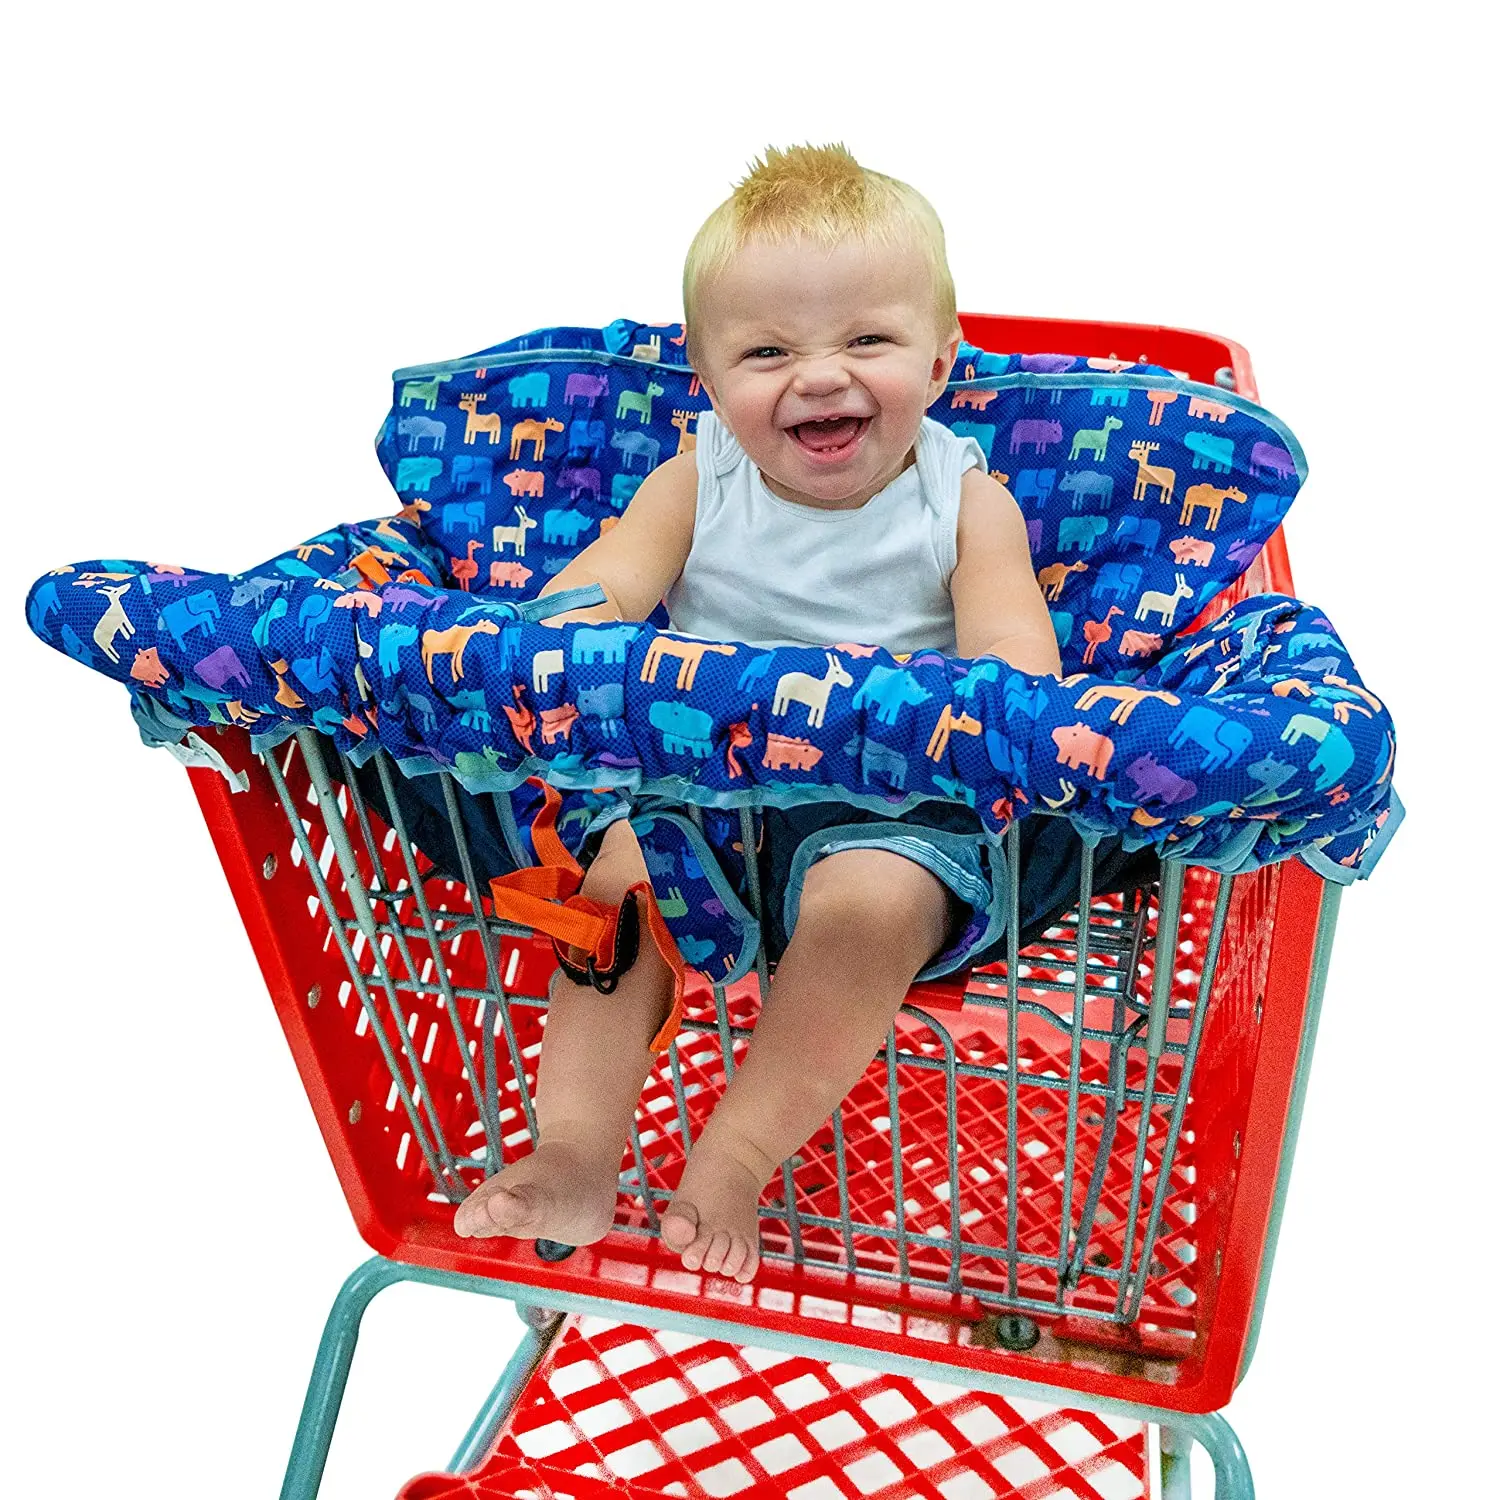 shopping cart seat cover for baby toddler high chair cover seat pad full safety harness trolley highchair cover machine washable Universal Baby Kids 2-IN-1 Shopping Cart Cover HighChair Cover For Toddler Cover Restaurant Highchair Dinosaurs Cheaper